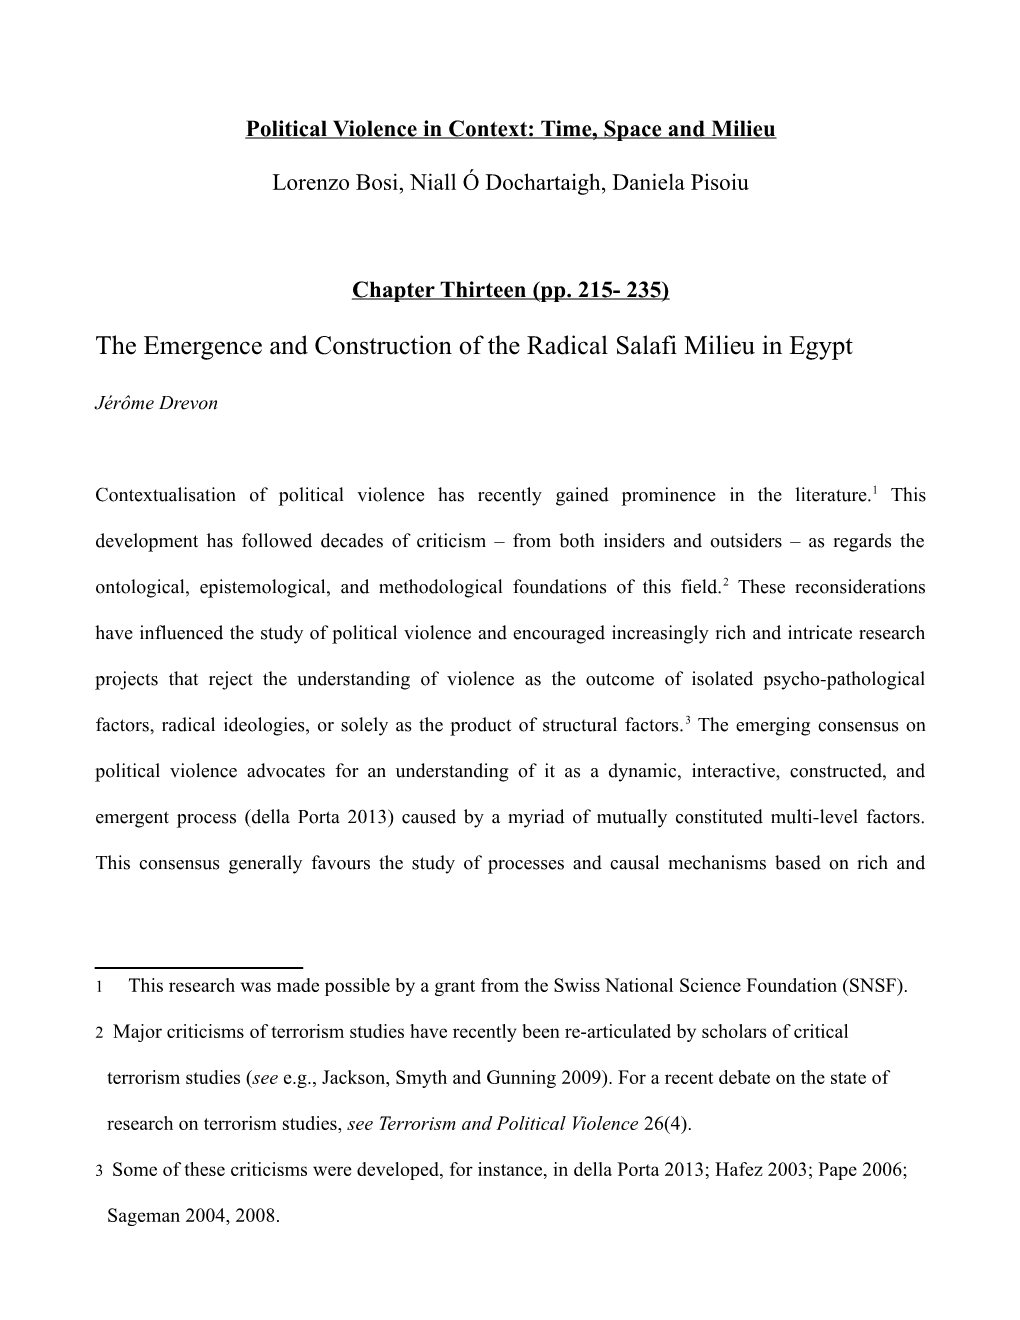 The Emergence and Construction of the Radical Salafi Milieu in Egypt